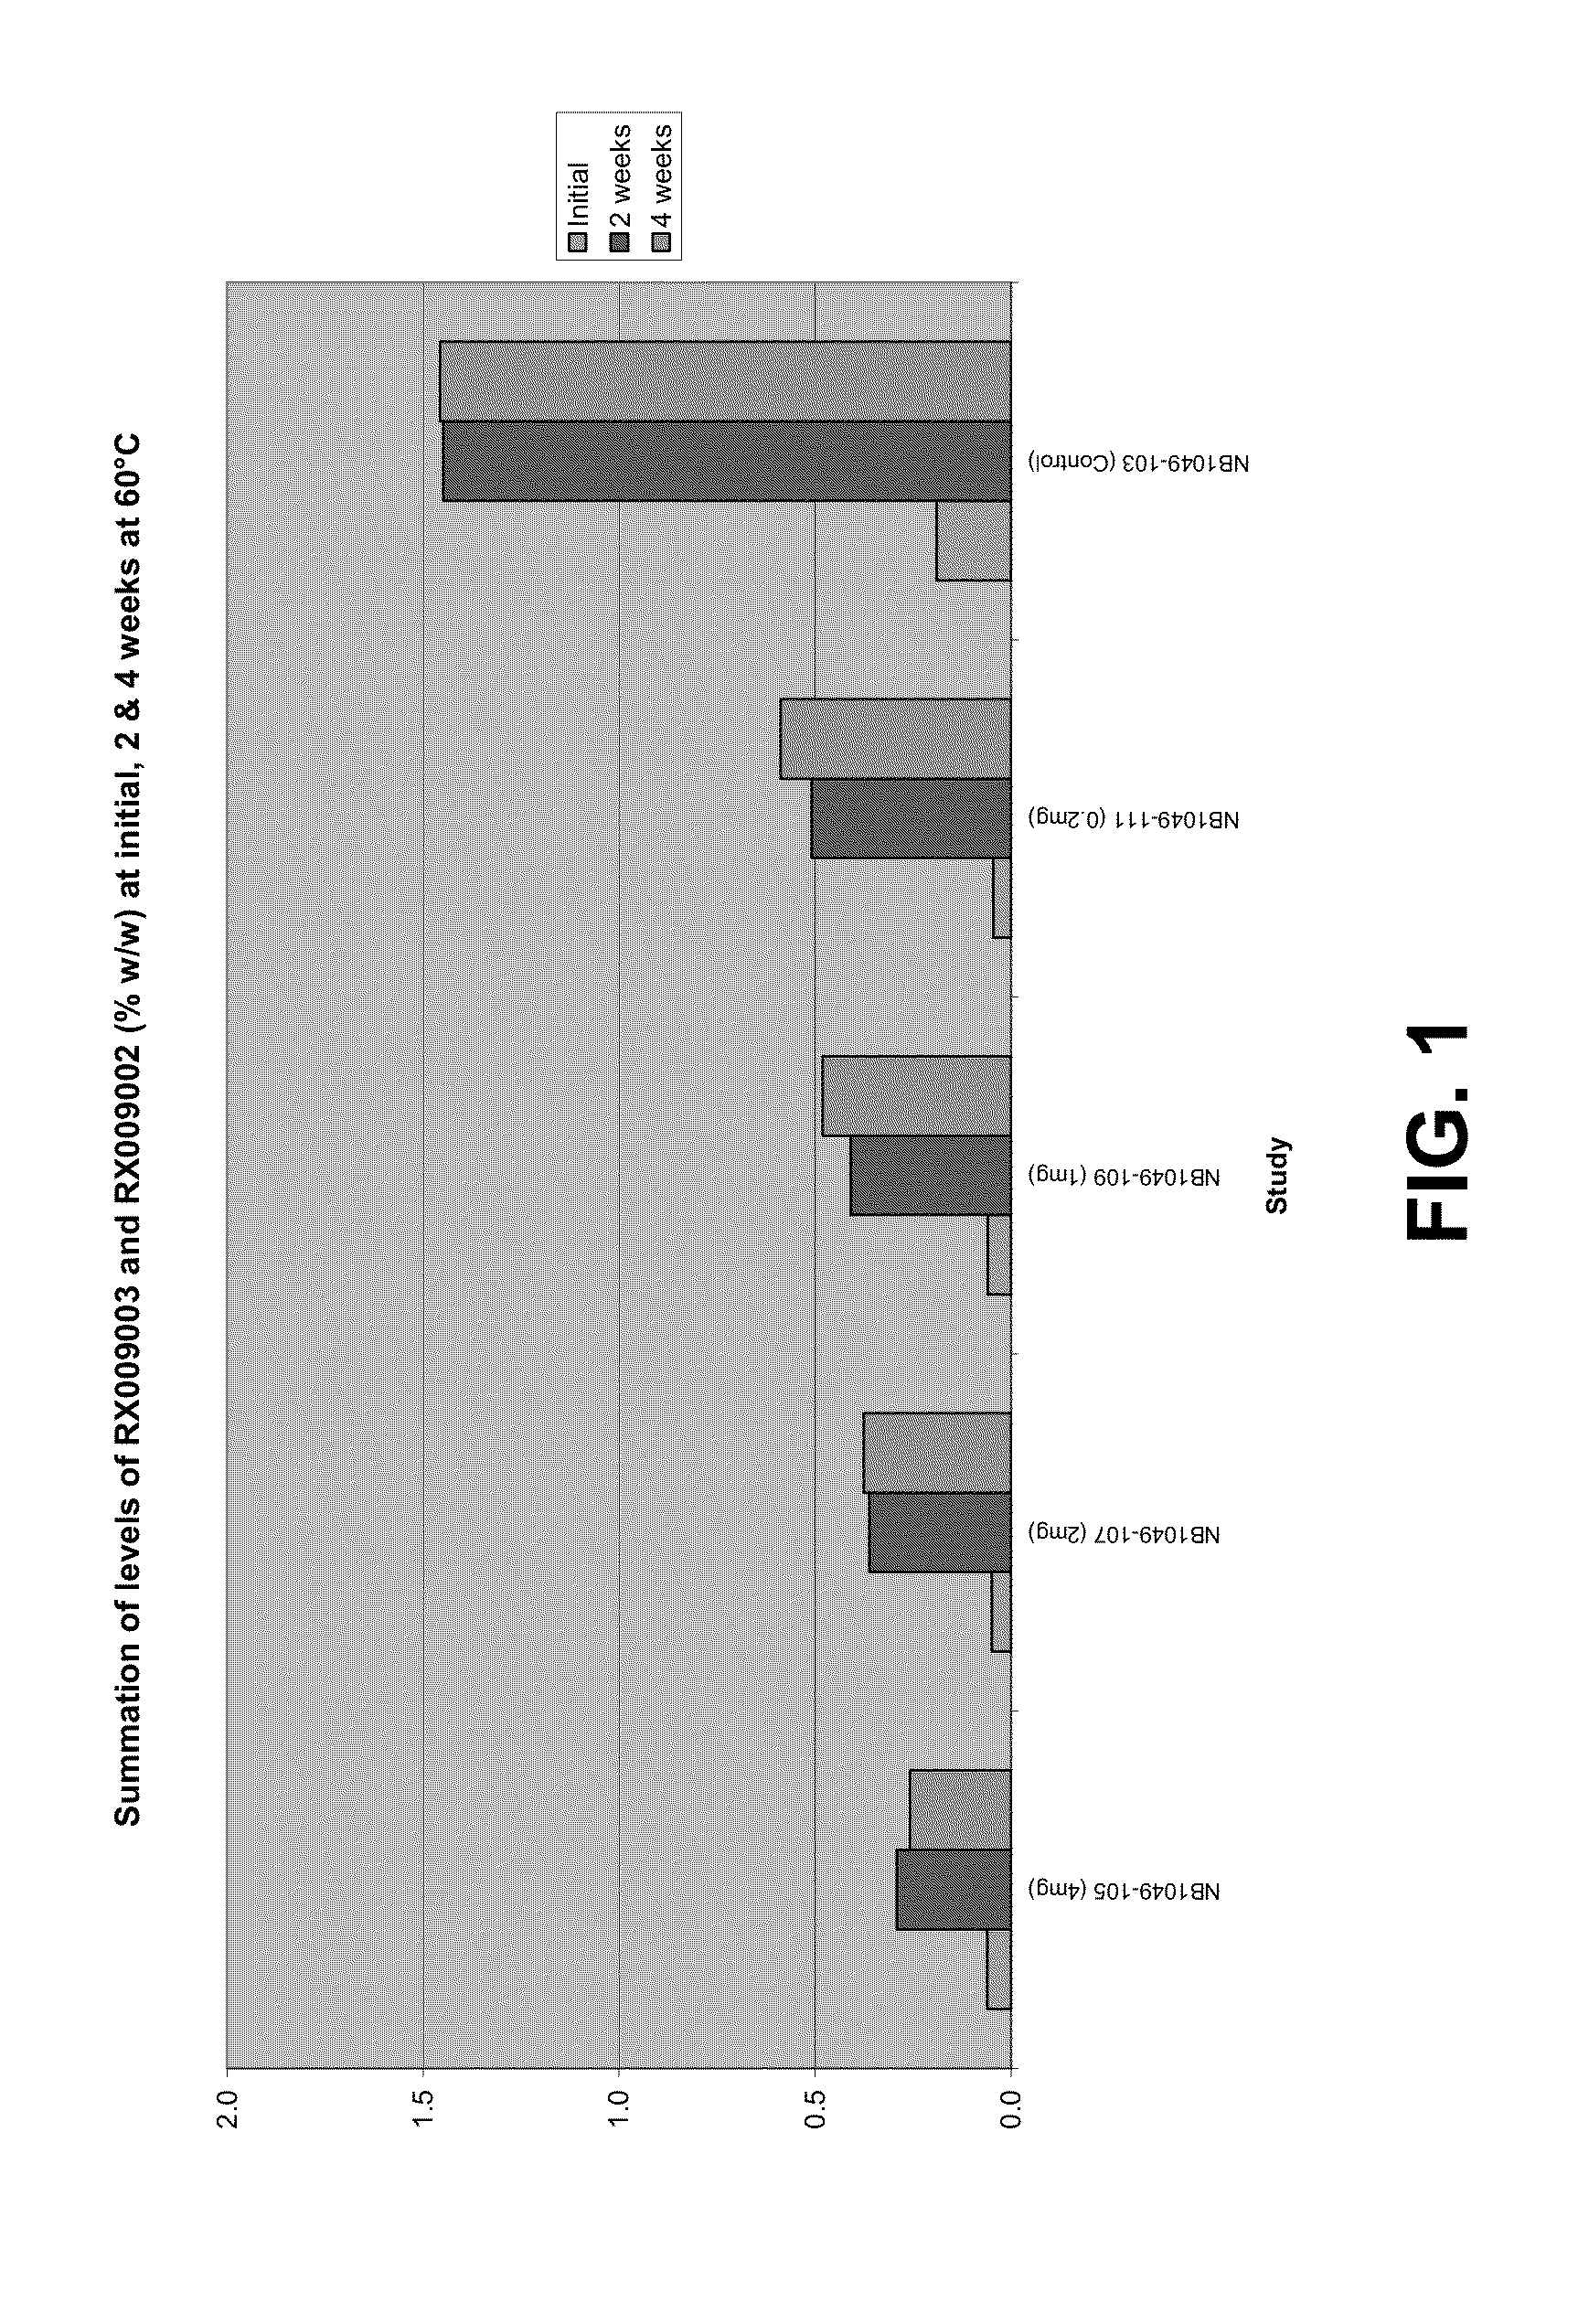 Sublingual and buccal film compositions